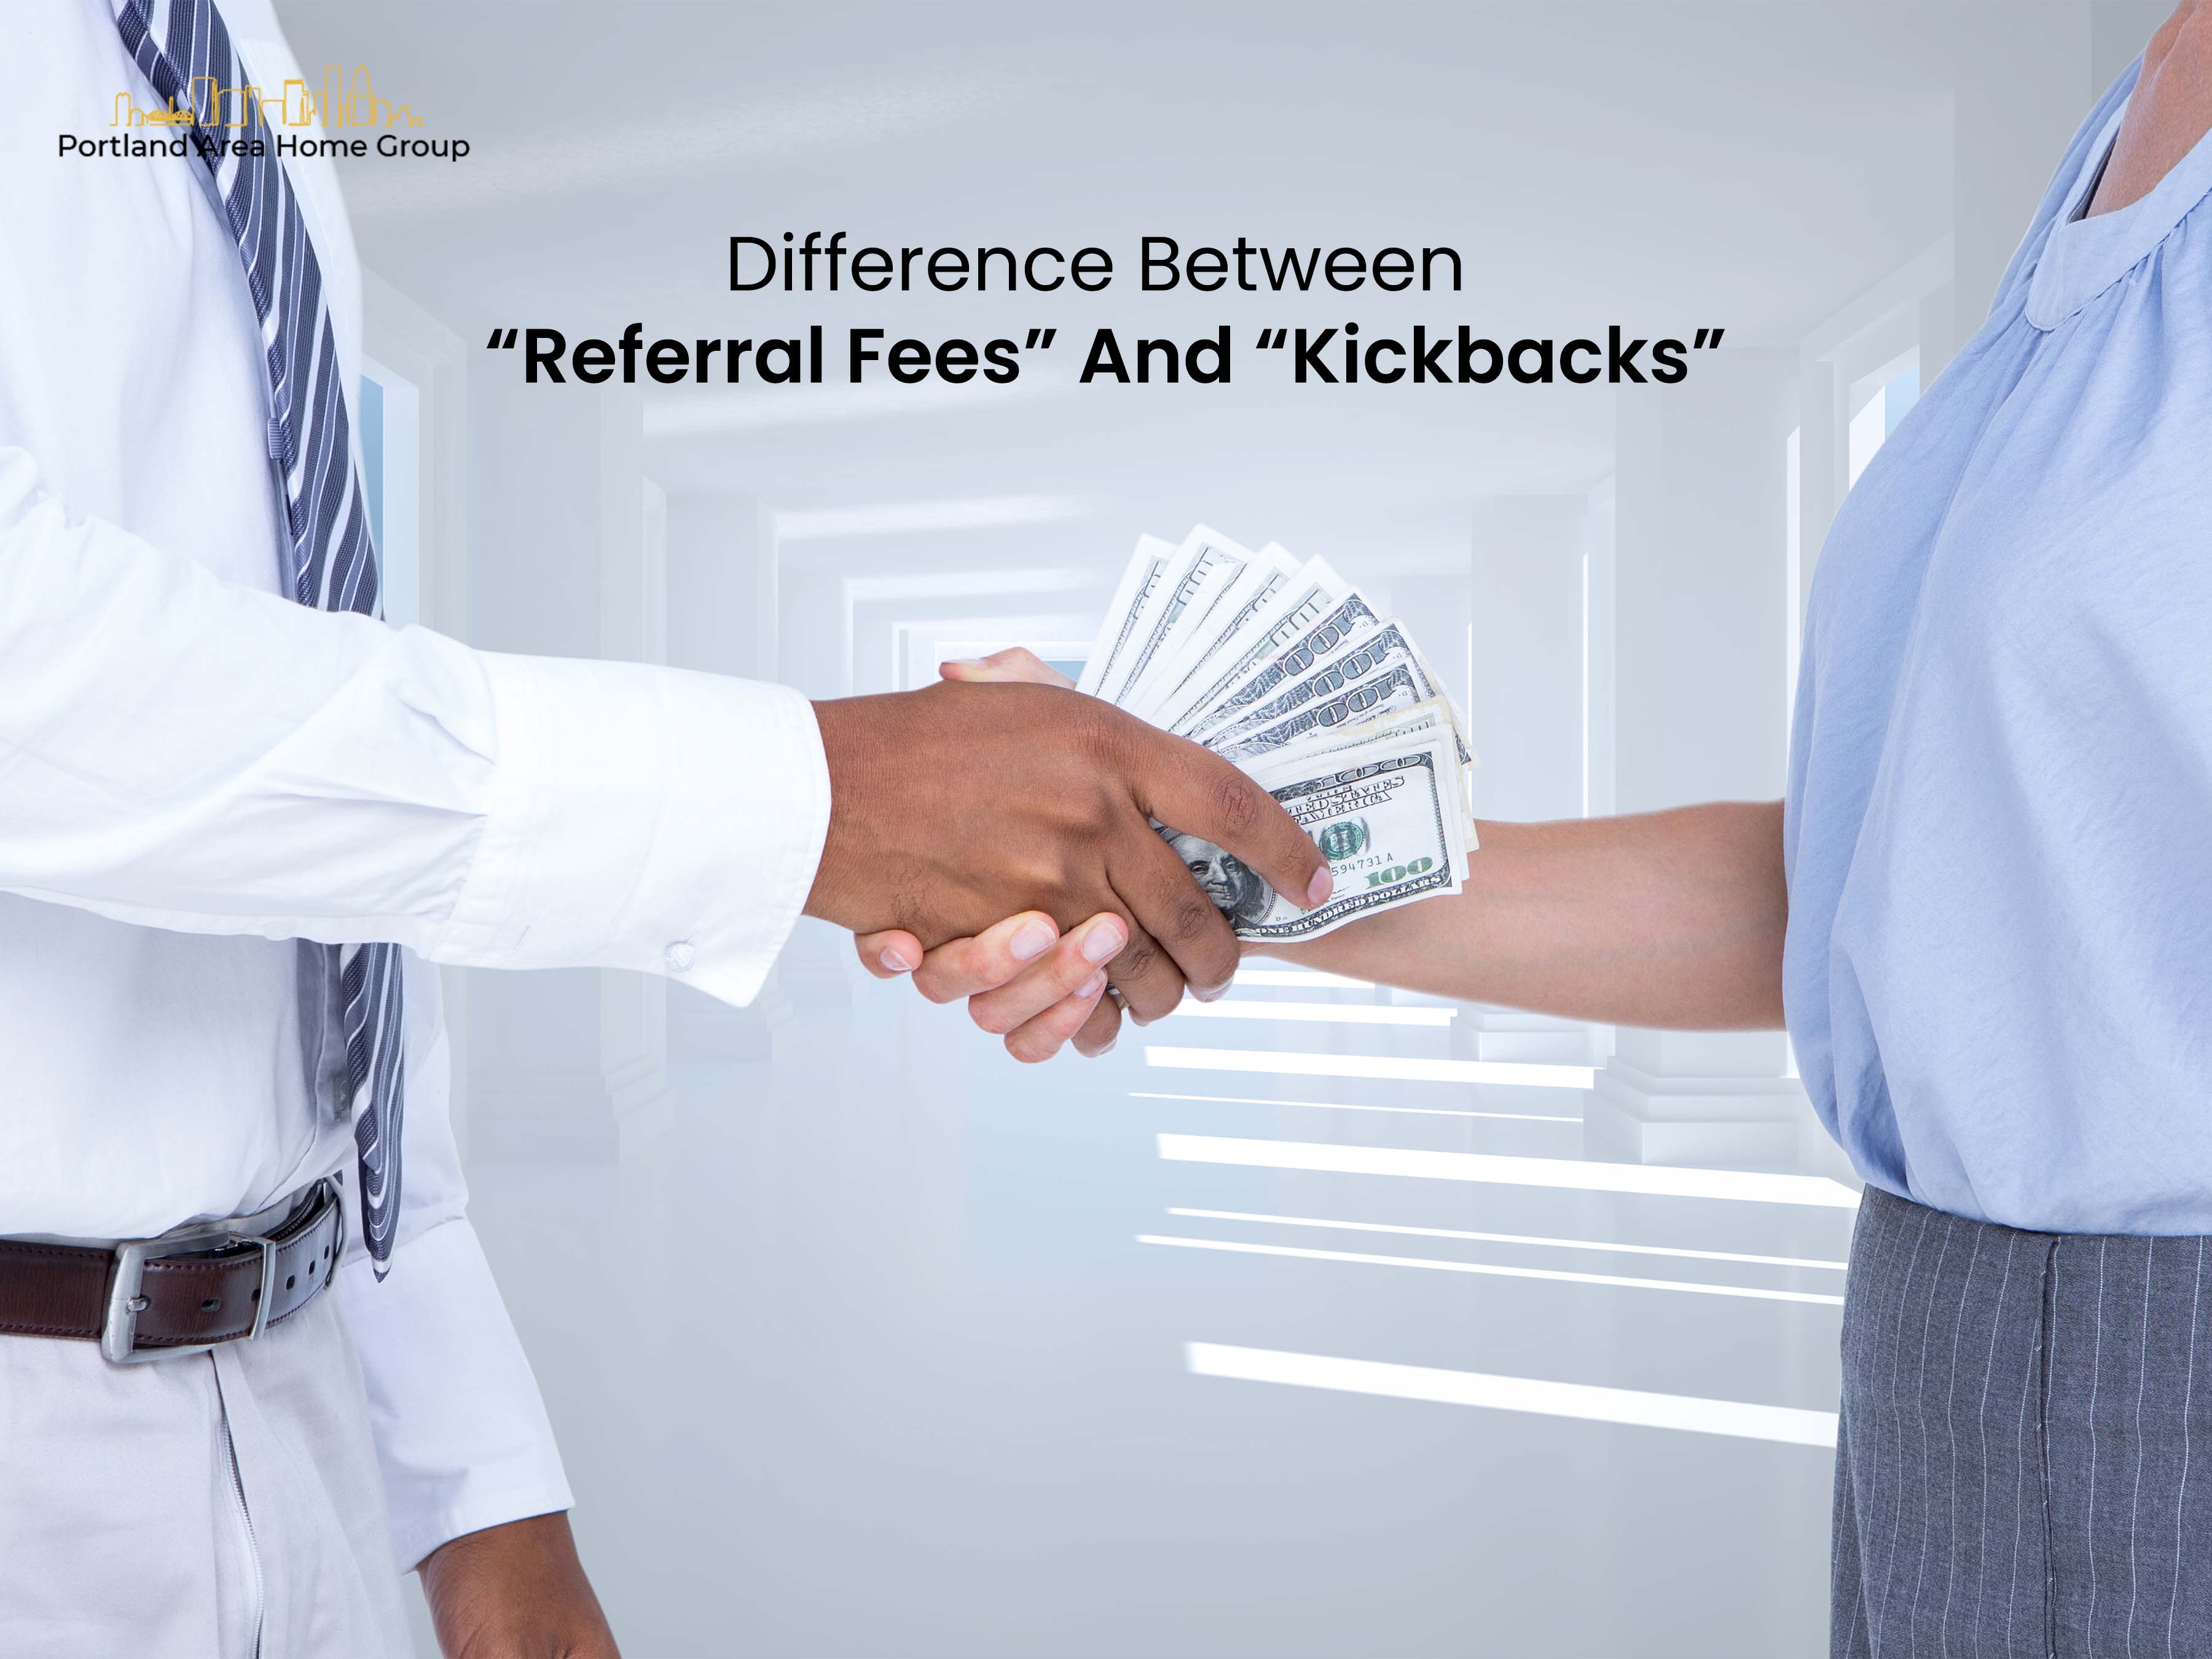 Difference Between “Referral Fees” And “Kickbacks”